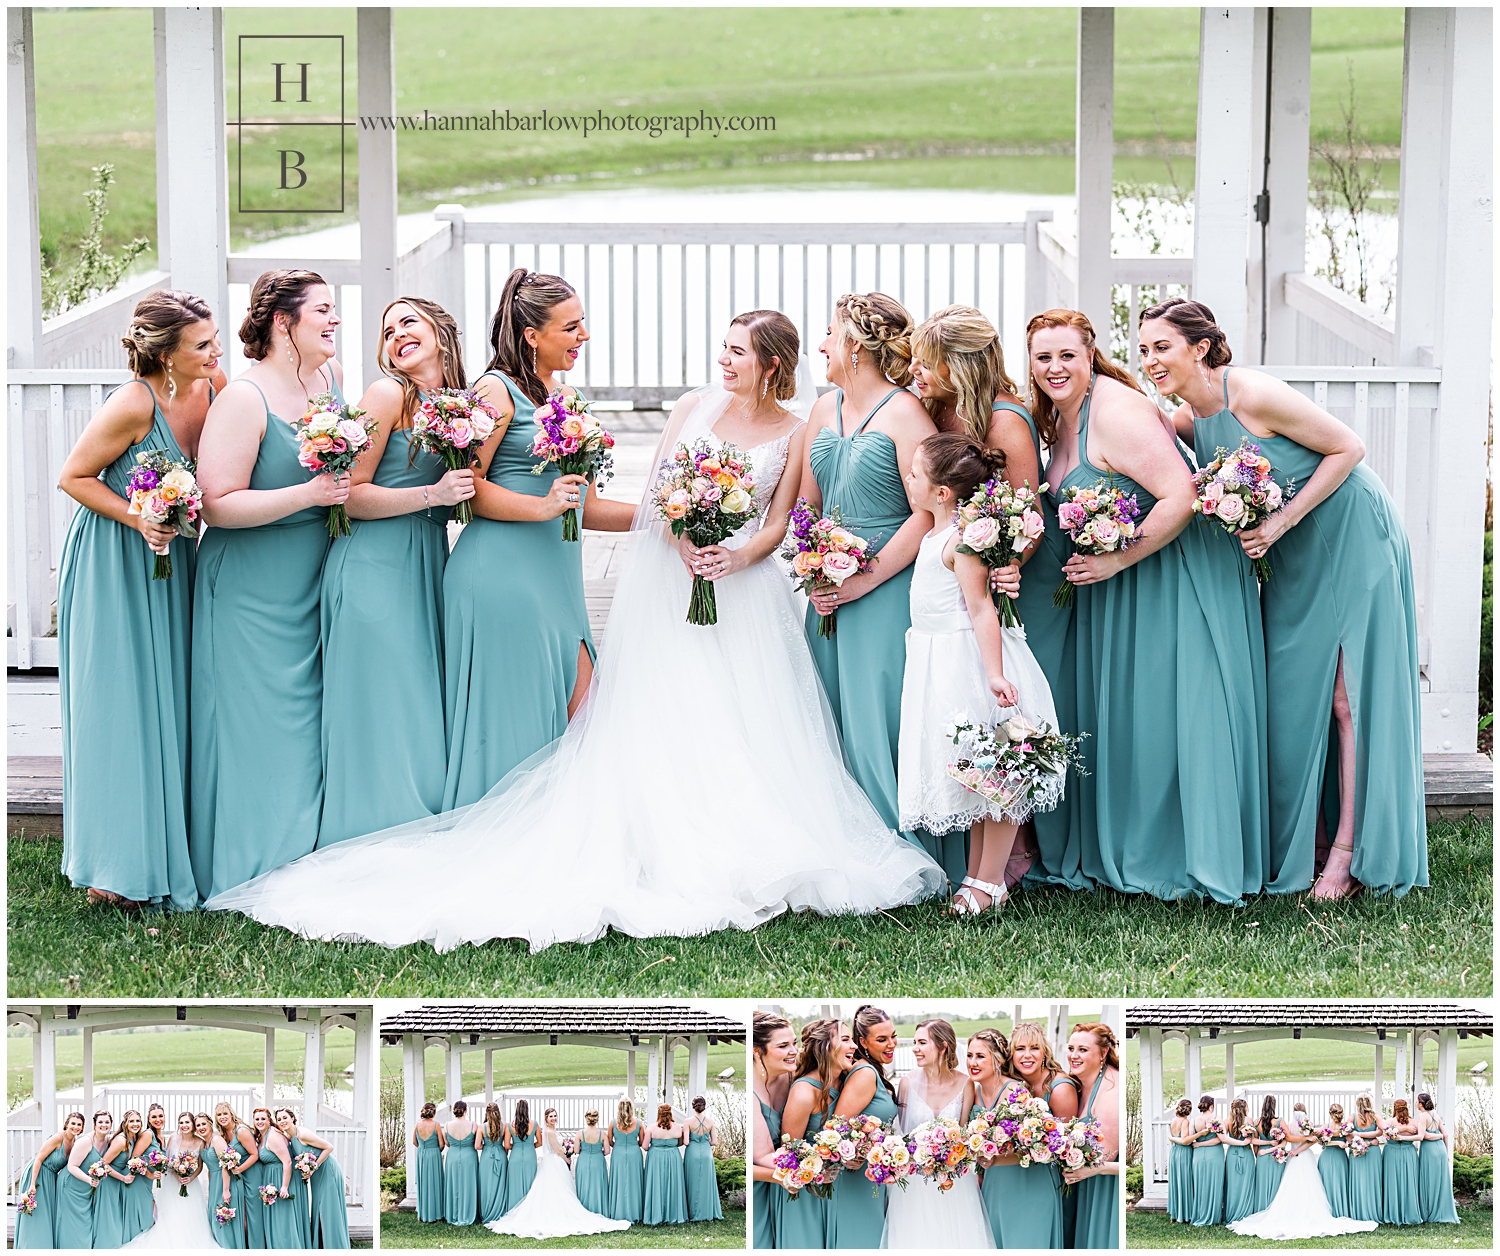 Bride, bridesmaids and flower girl pose for wedding formal photos at the White Barn wearing deep sea teal dresses.